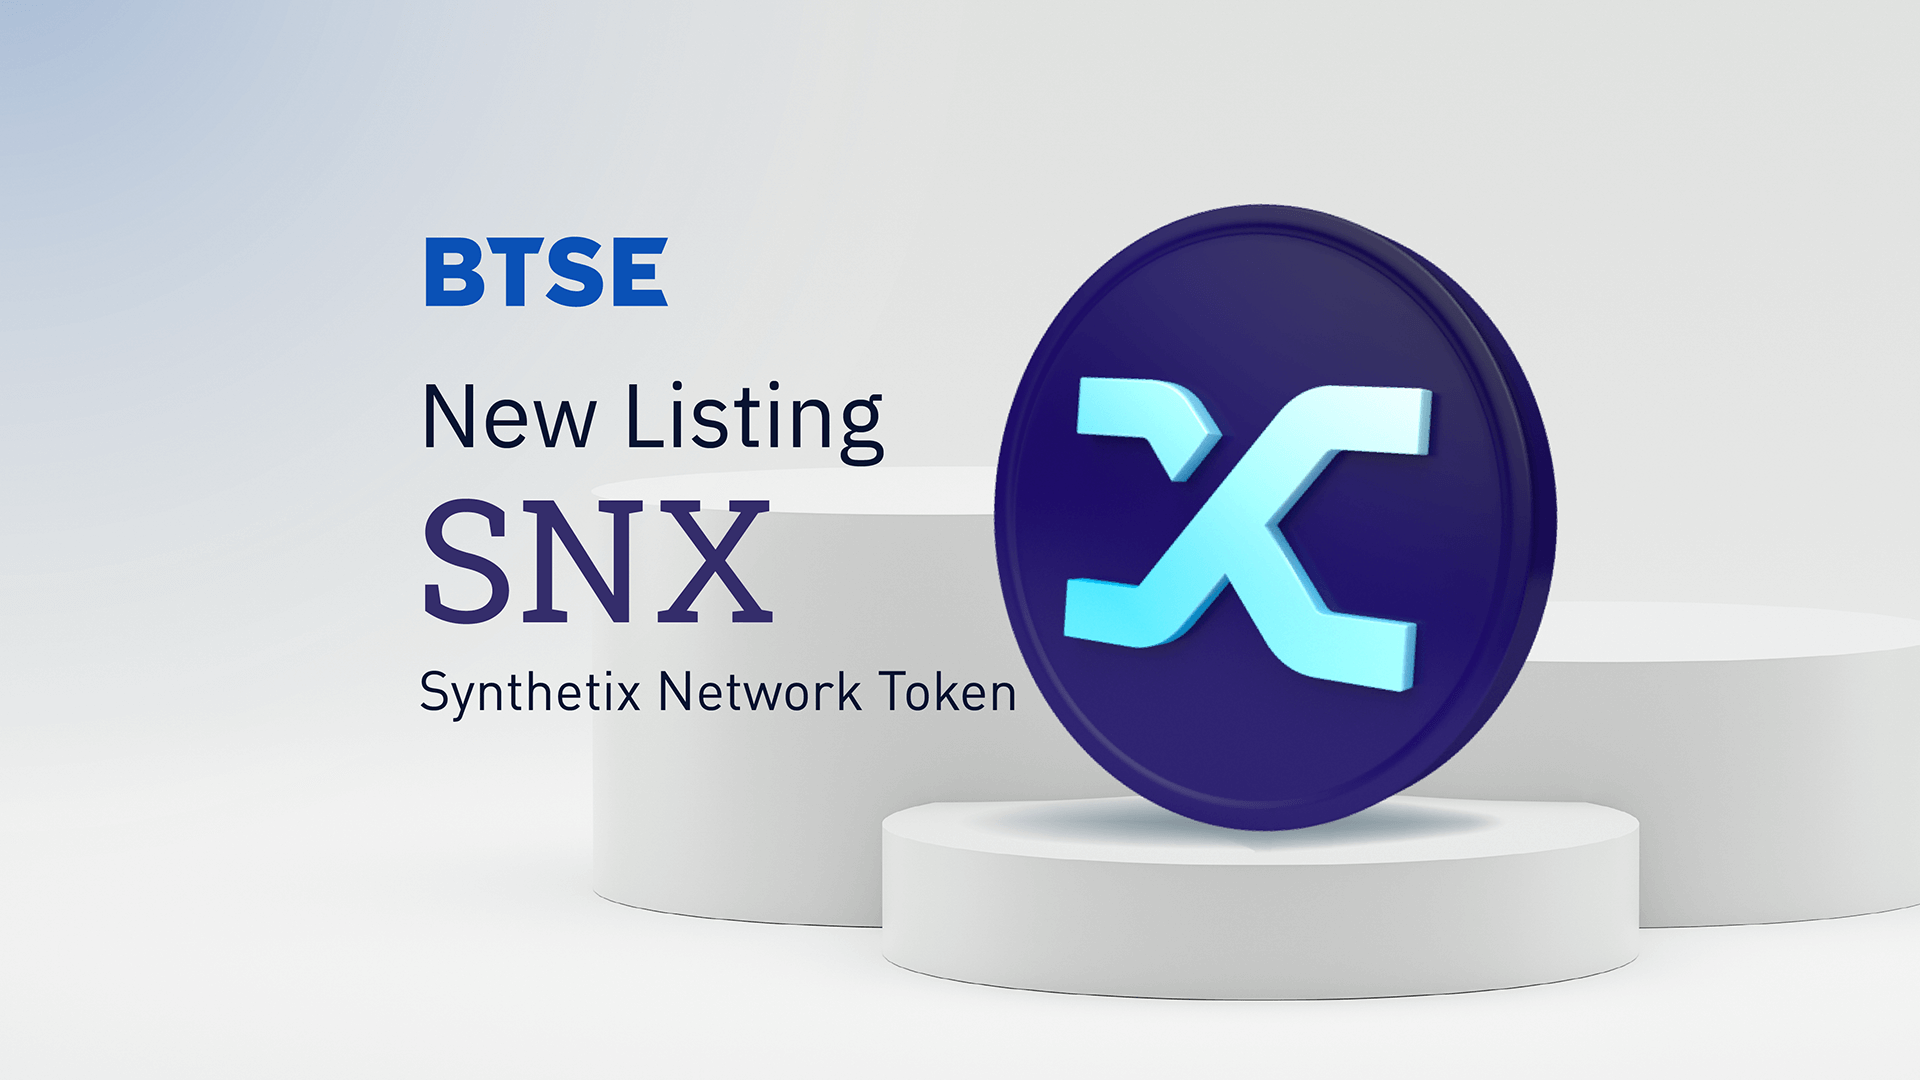 BTSE Lists SNX, Enabling Access to Synthetic Assets